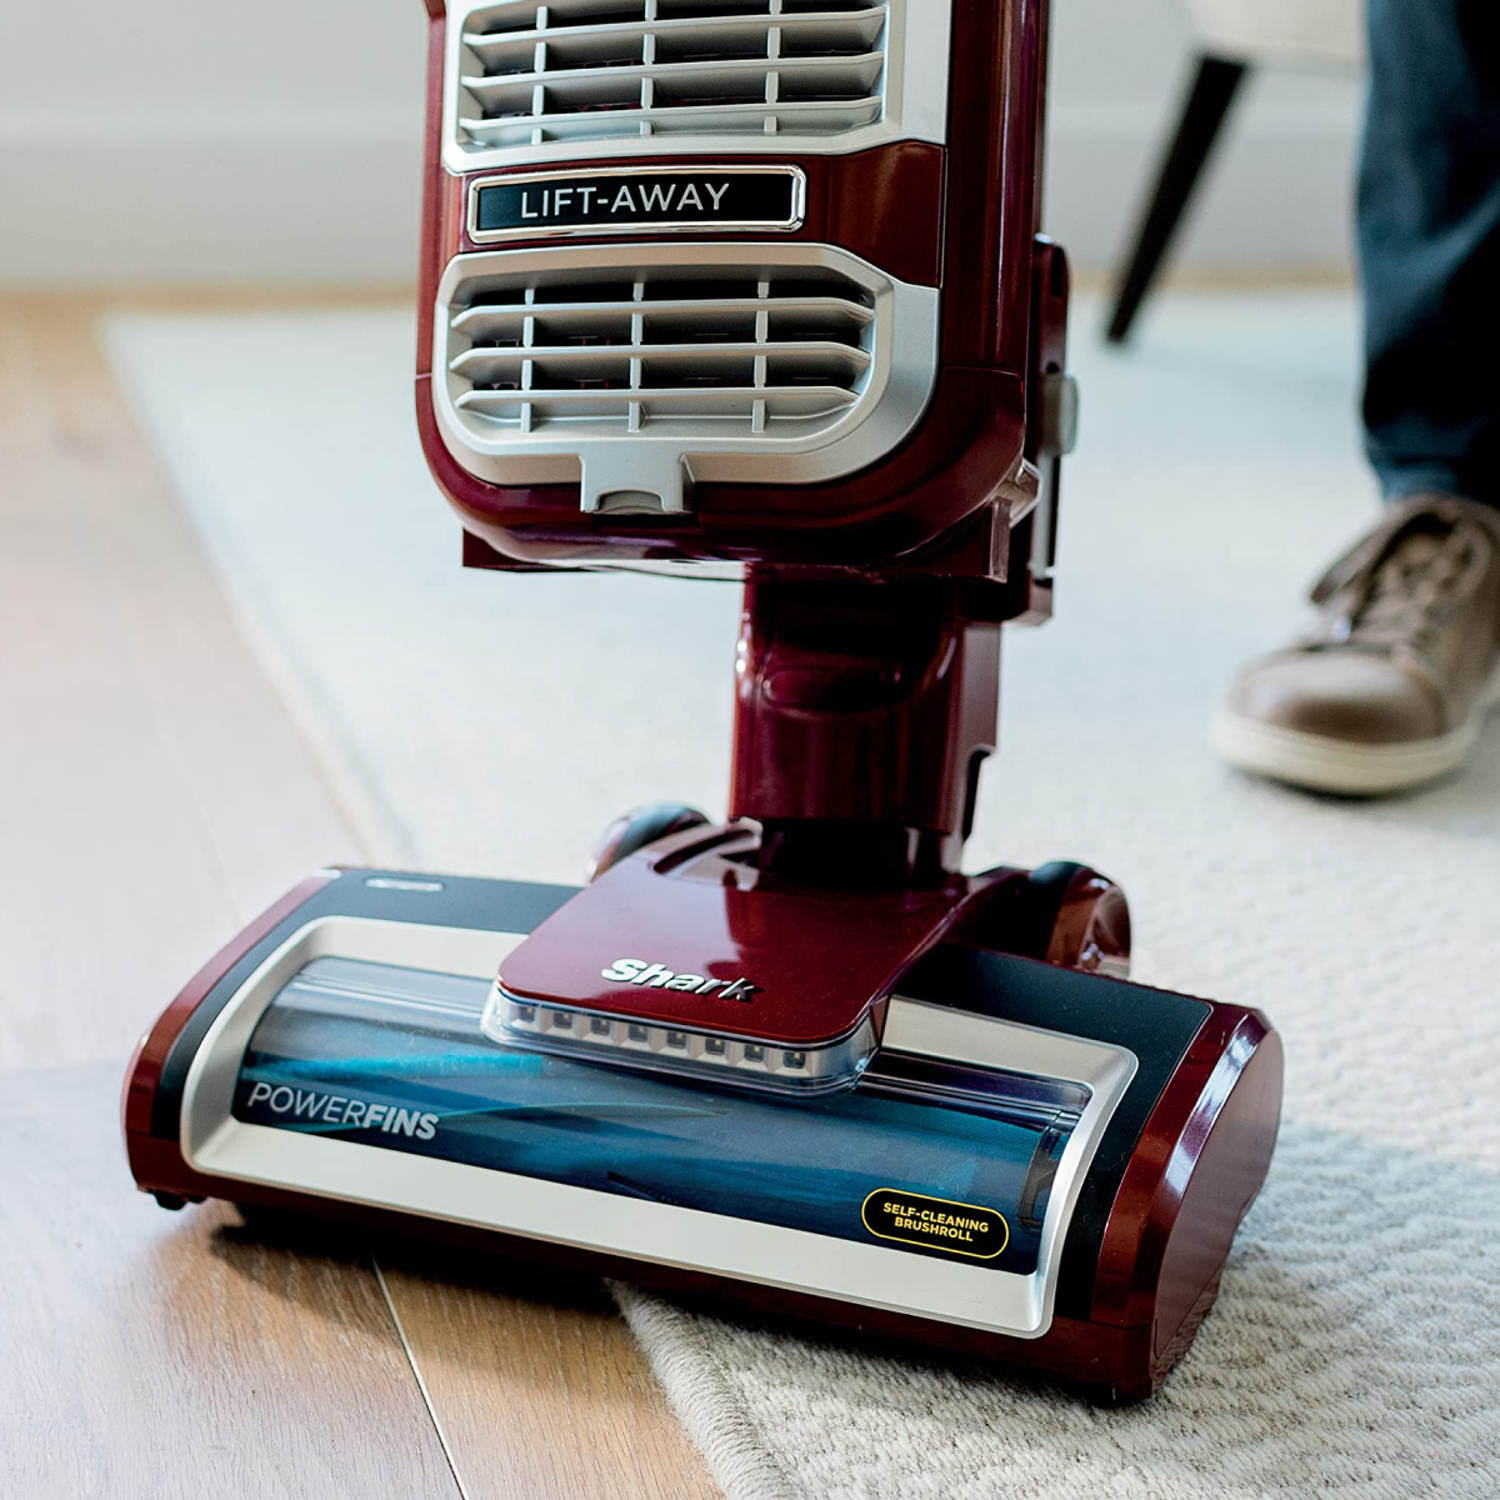 How often do you need to vacuum?